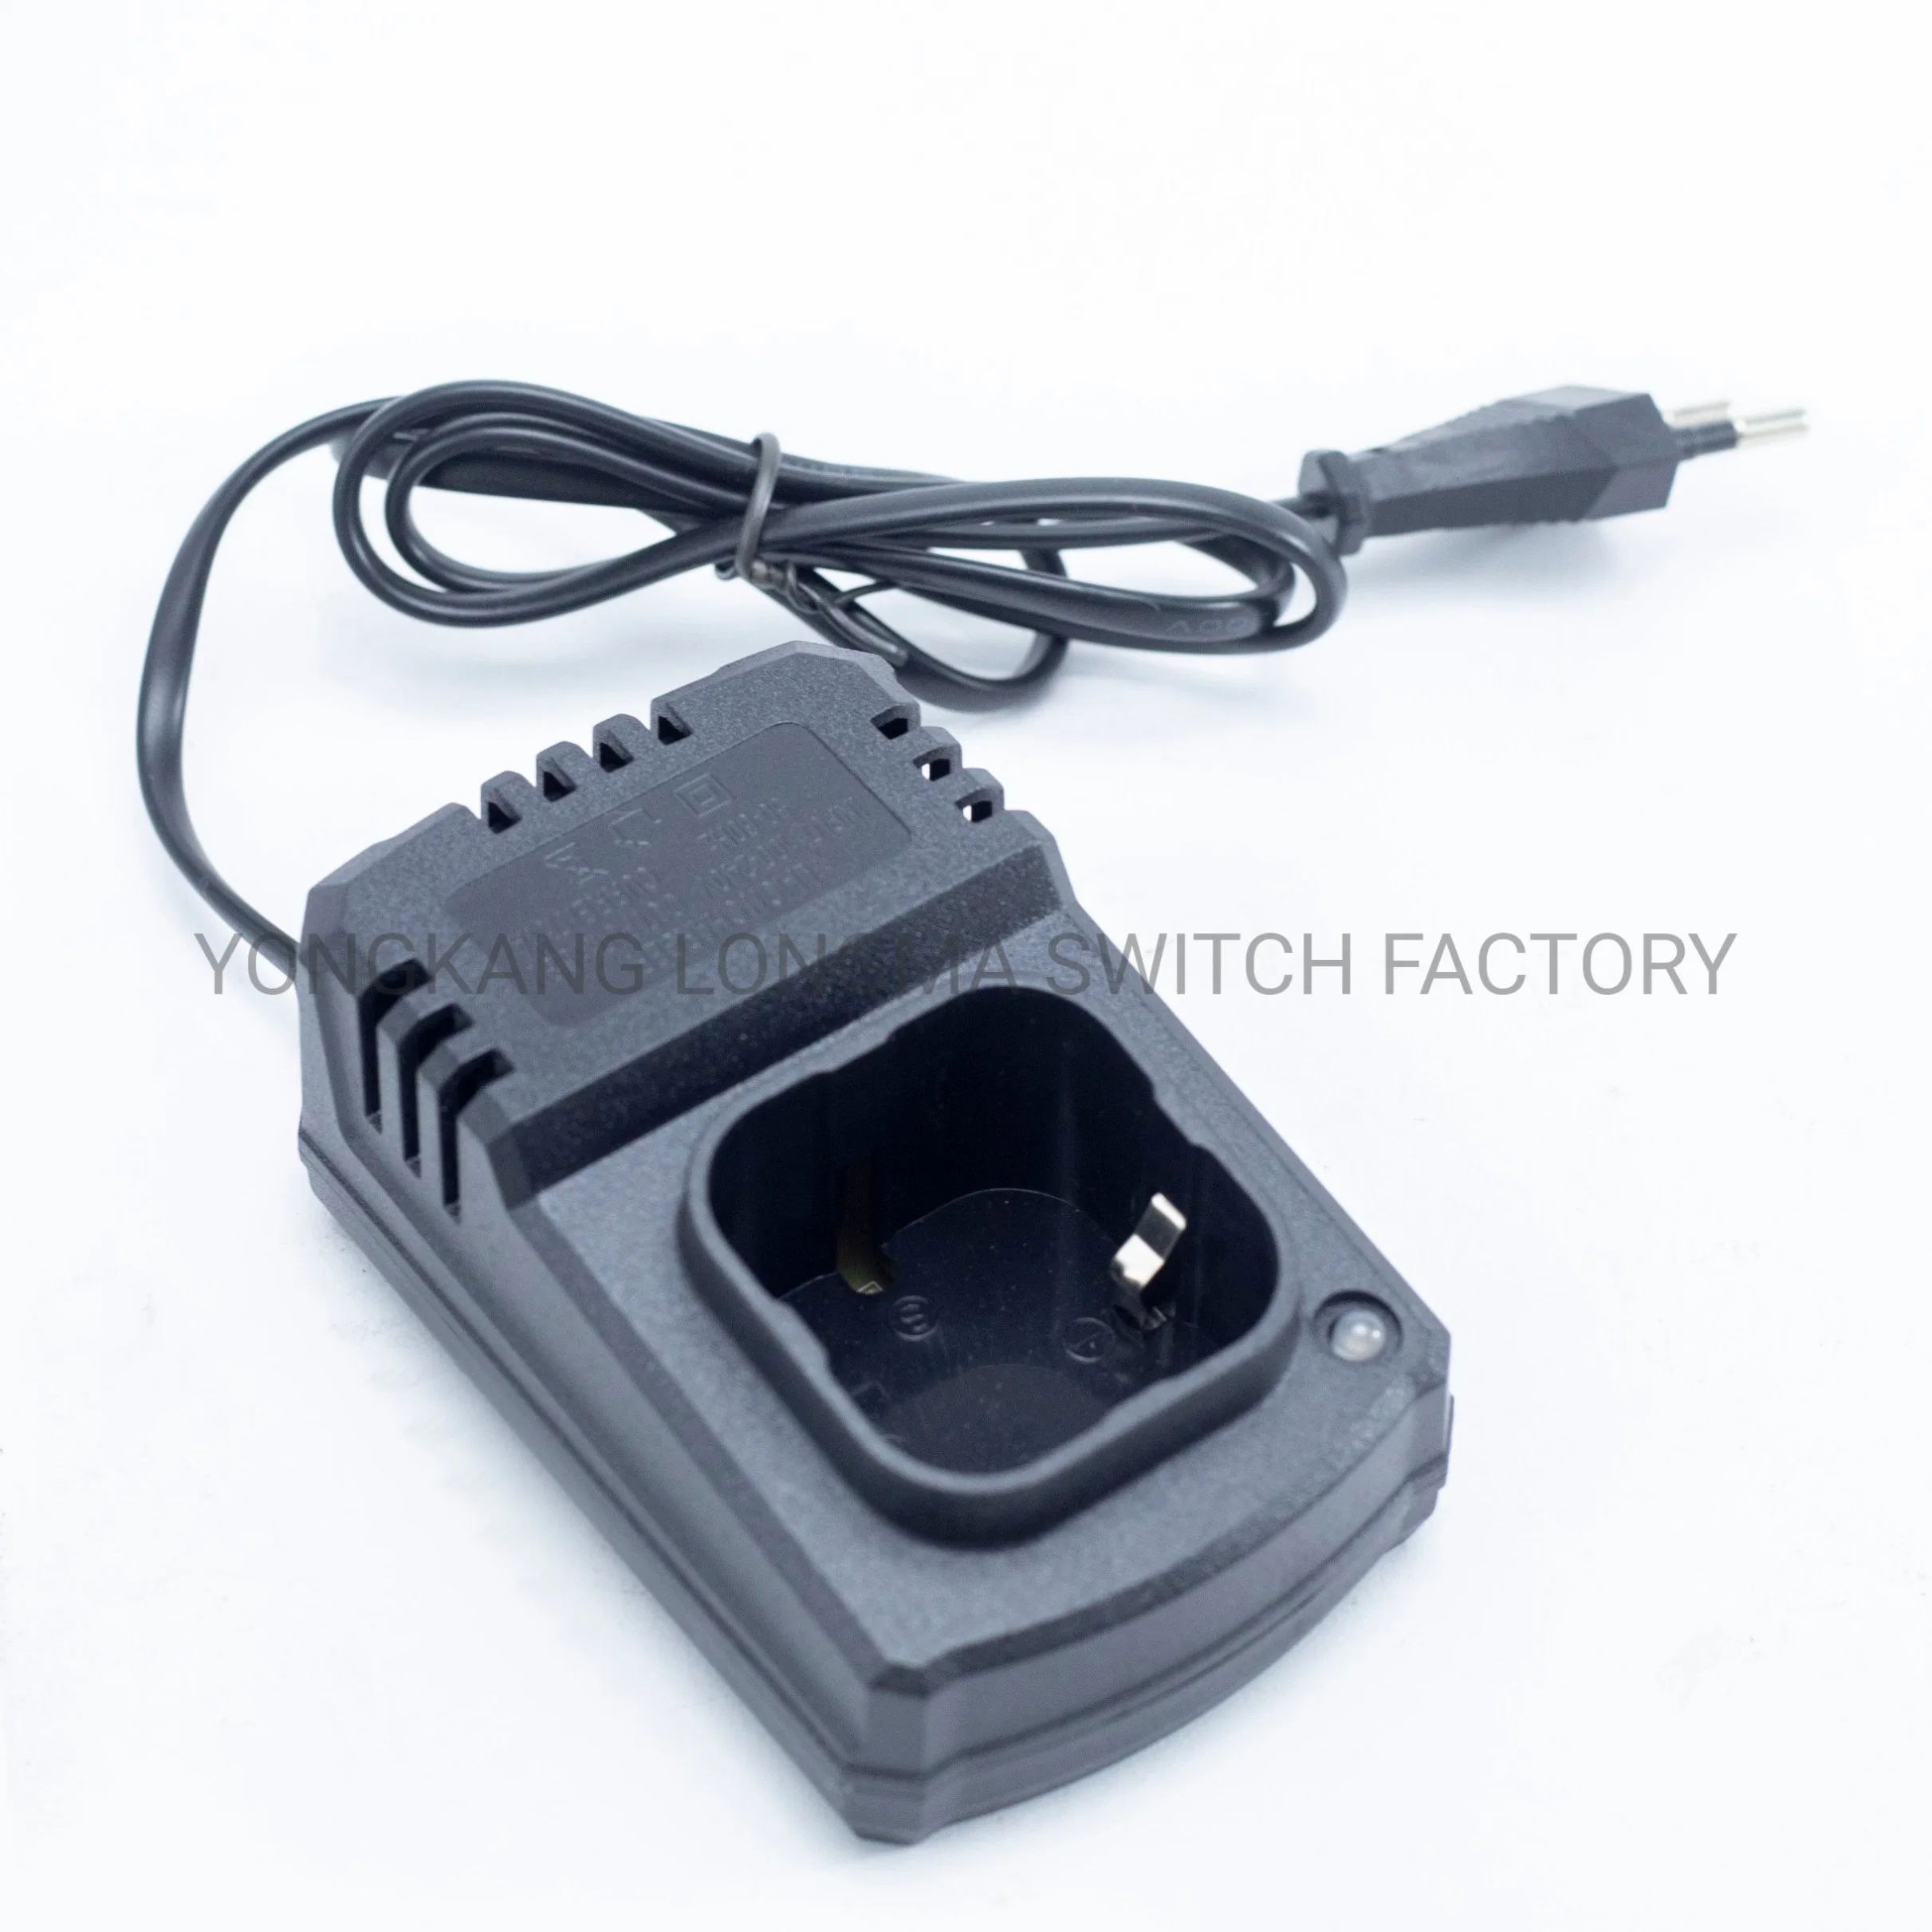 Replacement Power Tools Charger for 16.8V Lithium Ion Battery for Power Tool